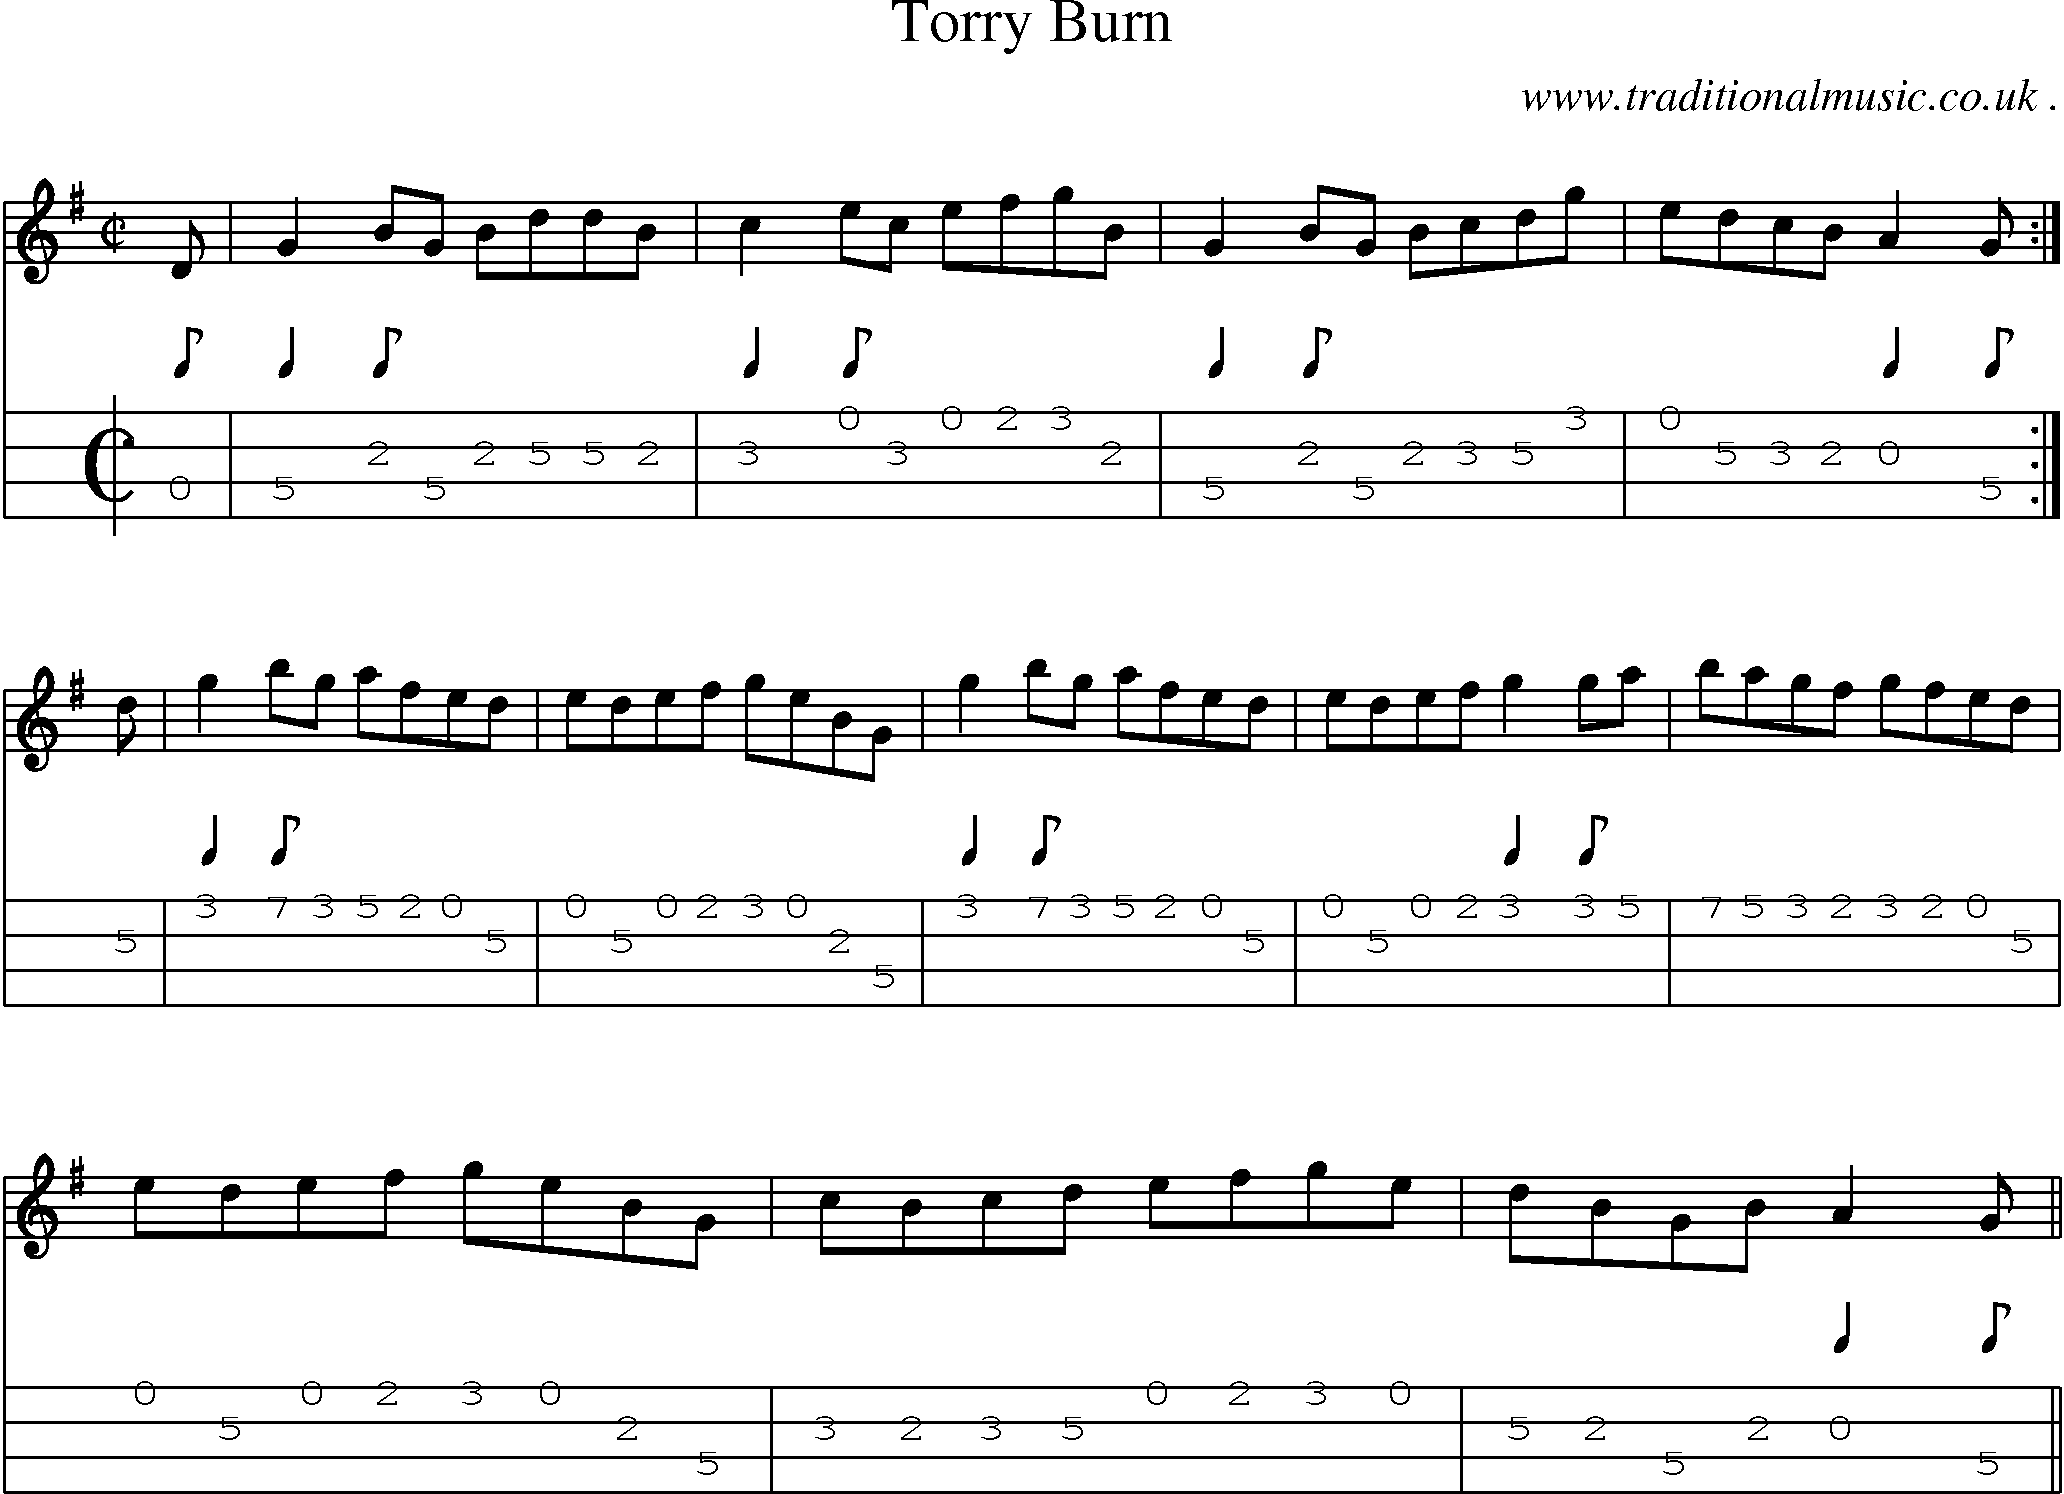 Sheet-music  score, Chords and Mandolin Tabs for Torry Burn